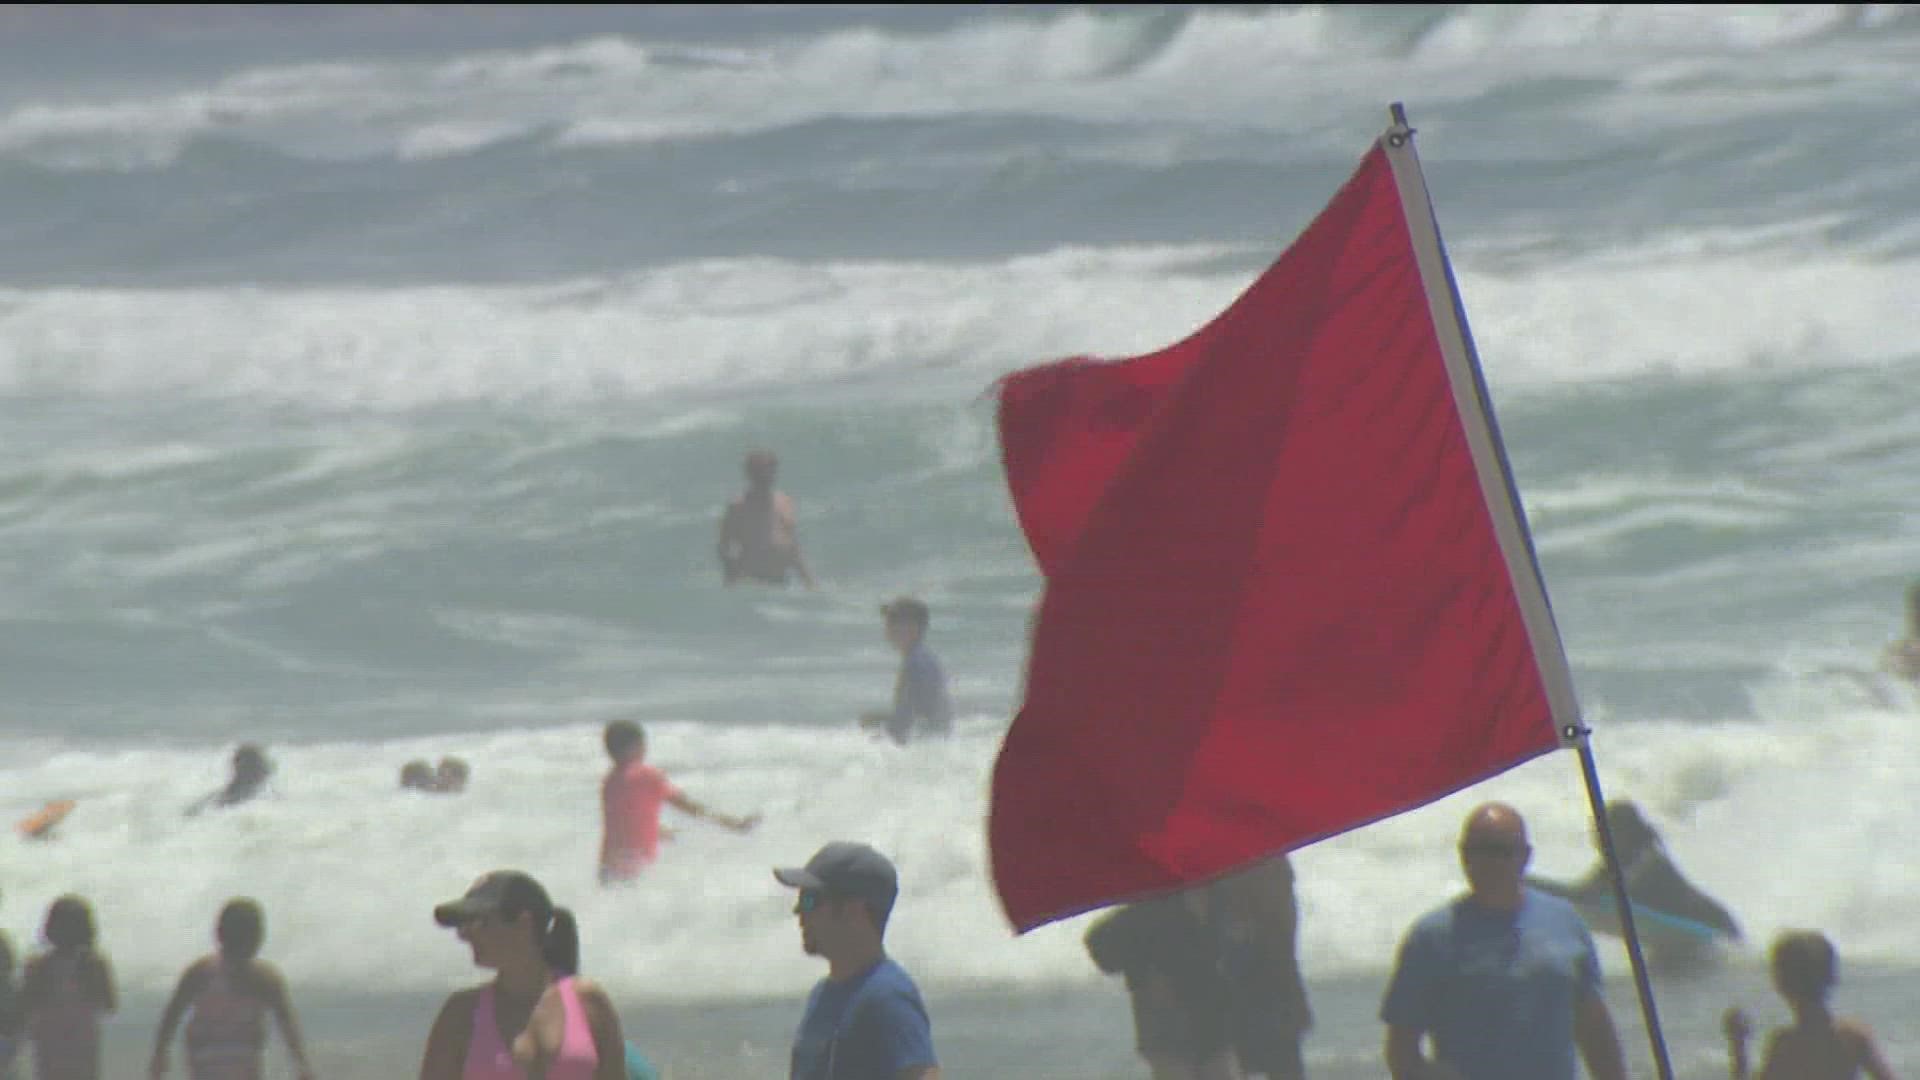 Blake Faumunia is a Lifeguard Lieutenant for the City of Oceanside, and said his team has been busy.